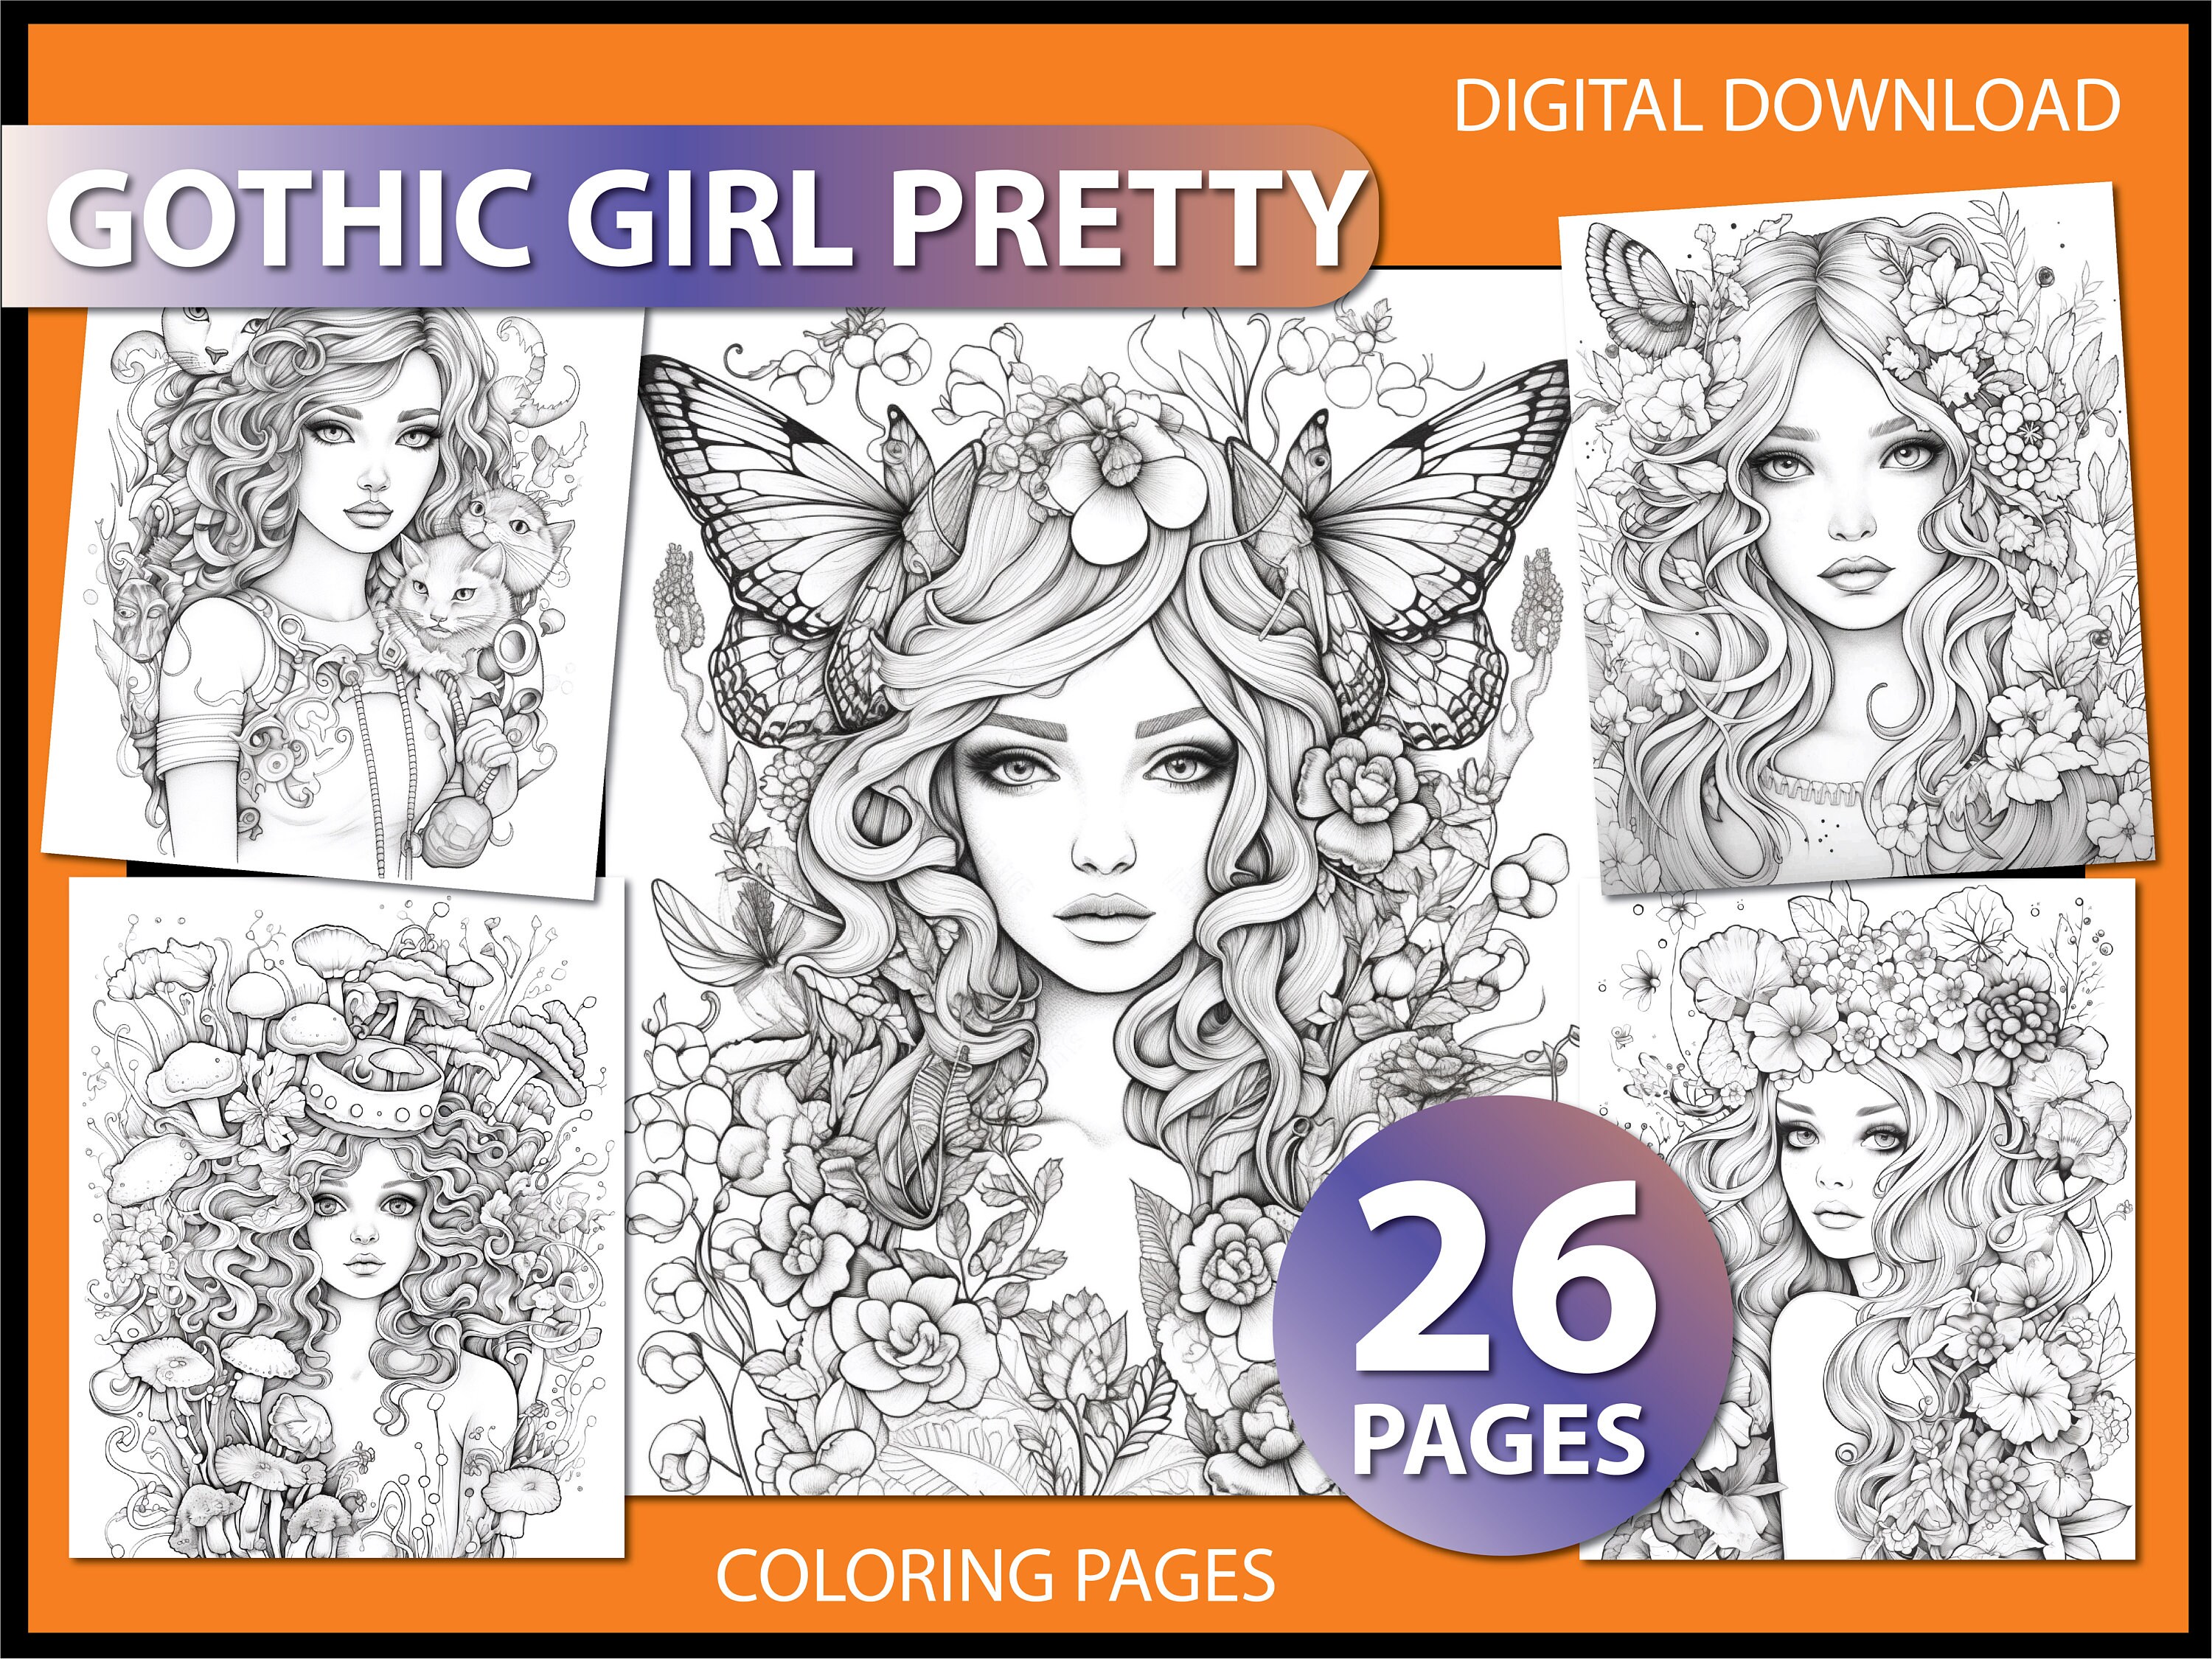 Gothic Girl Pretty Coloring Pages for Adult Coloring Book - Etsy